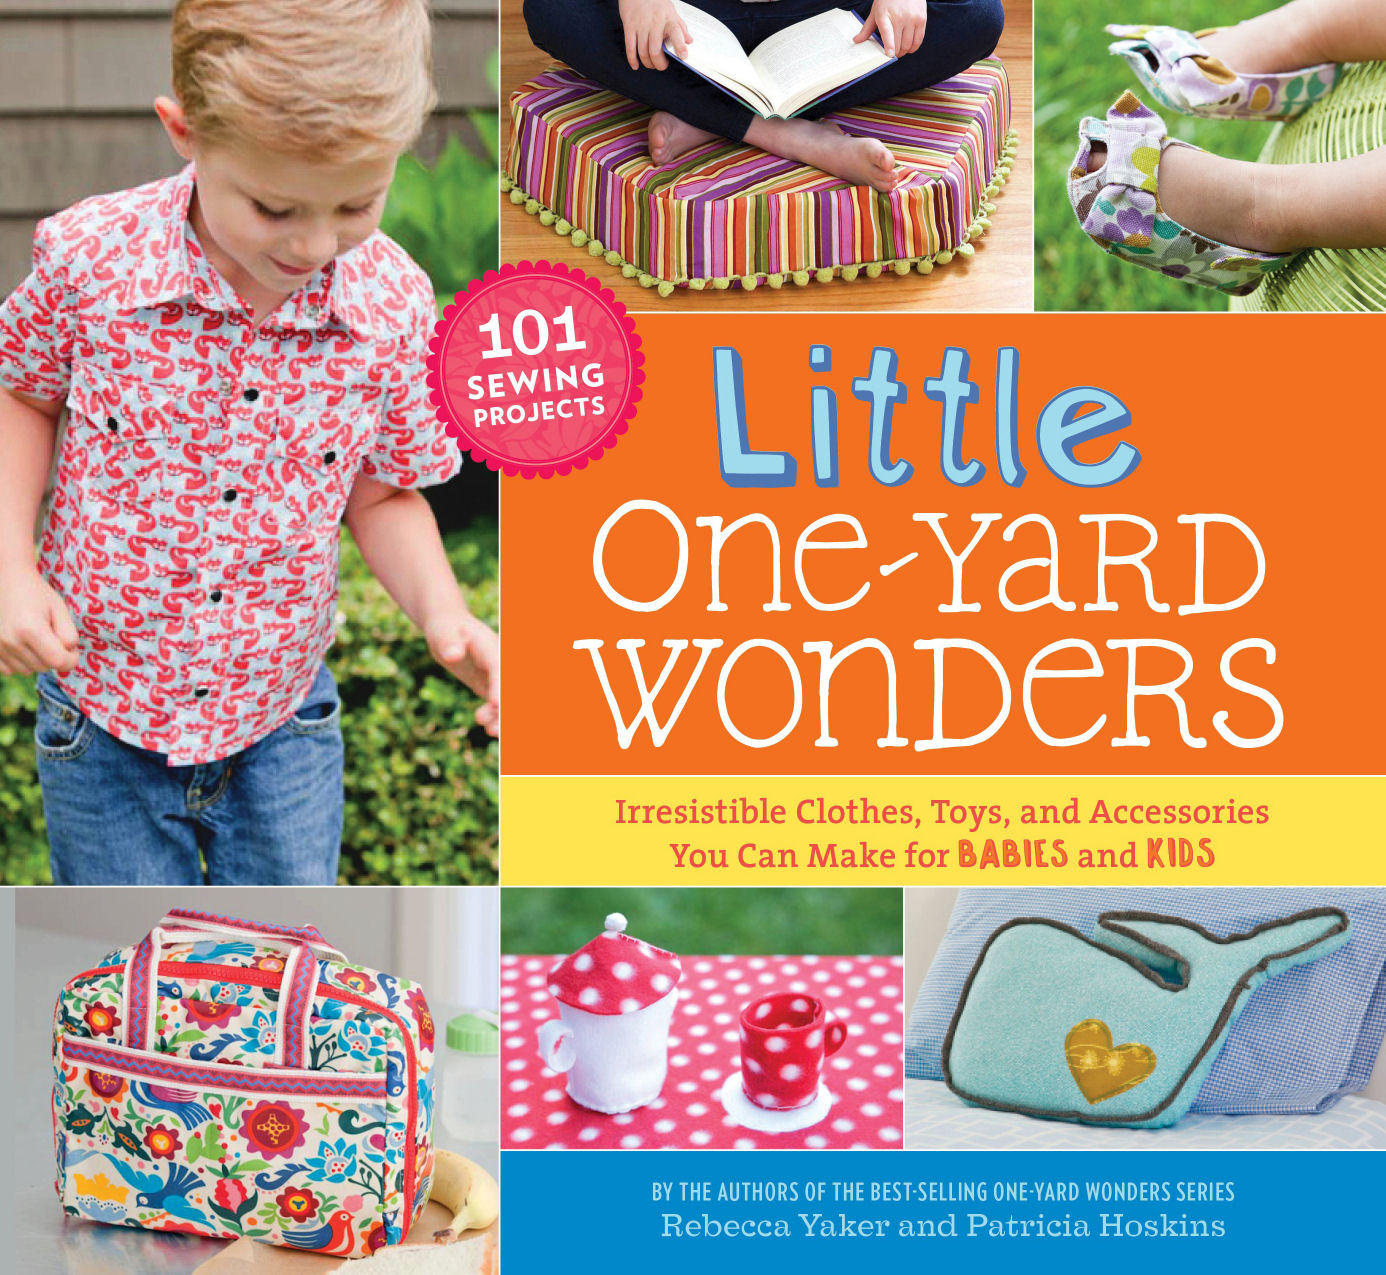 Little One-Yard Wonders- book review